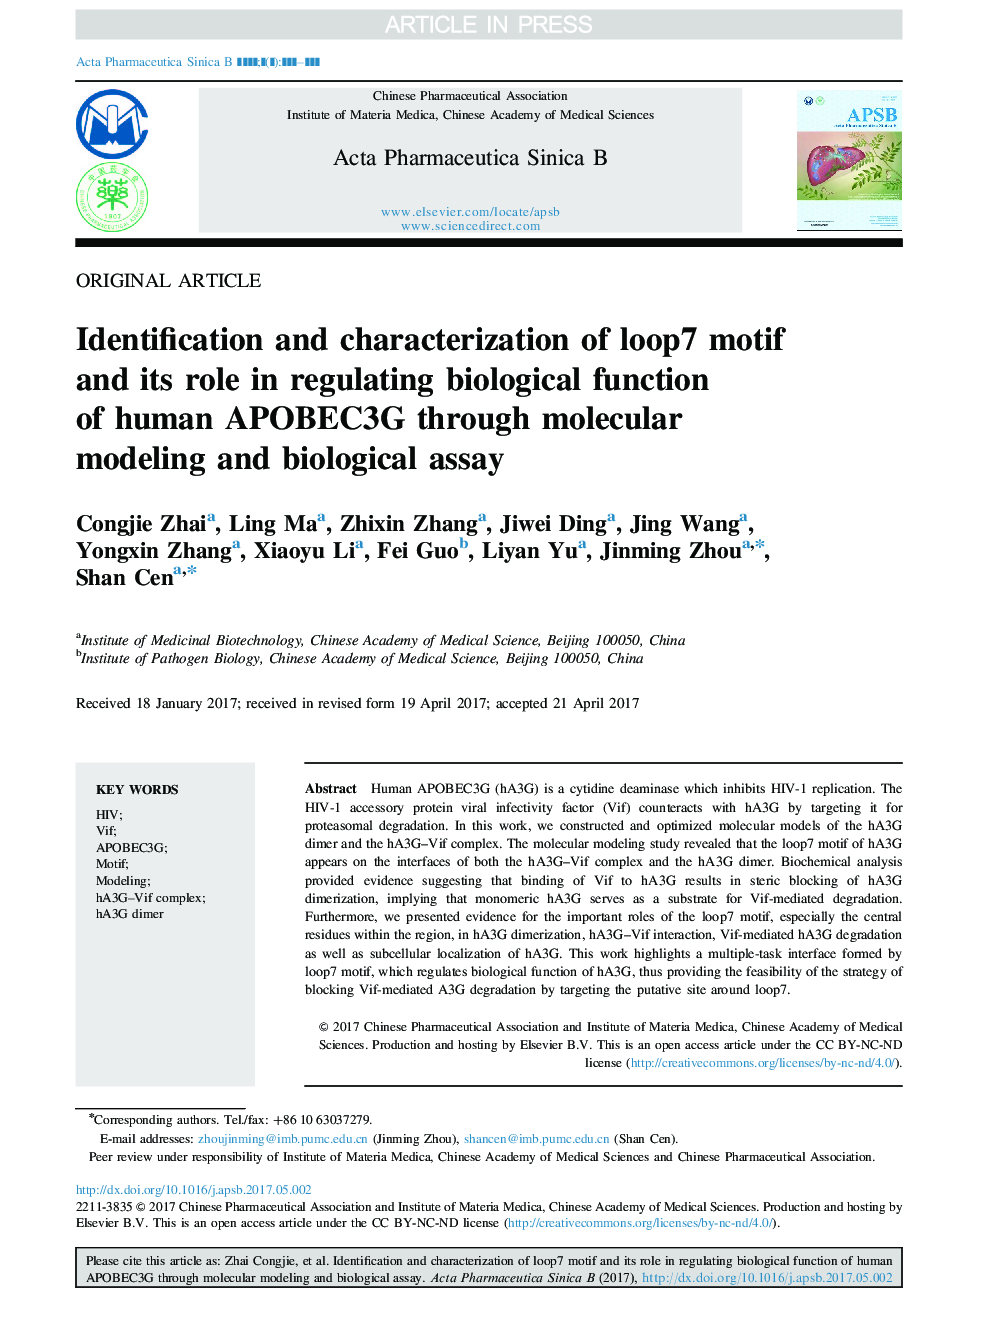 Identification and characterization of loop7 motif and its role in regulating biological function of human APOBEC3G through molecular modeling and biological assay